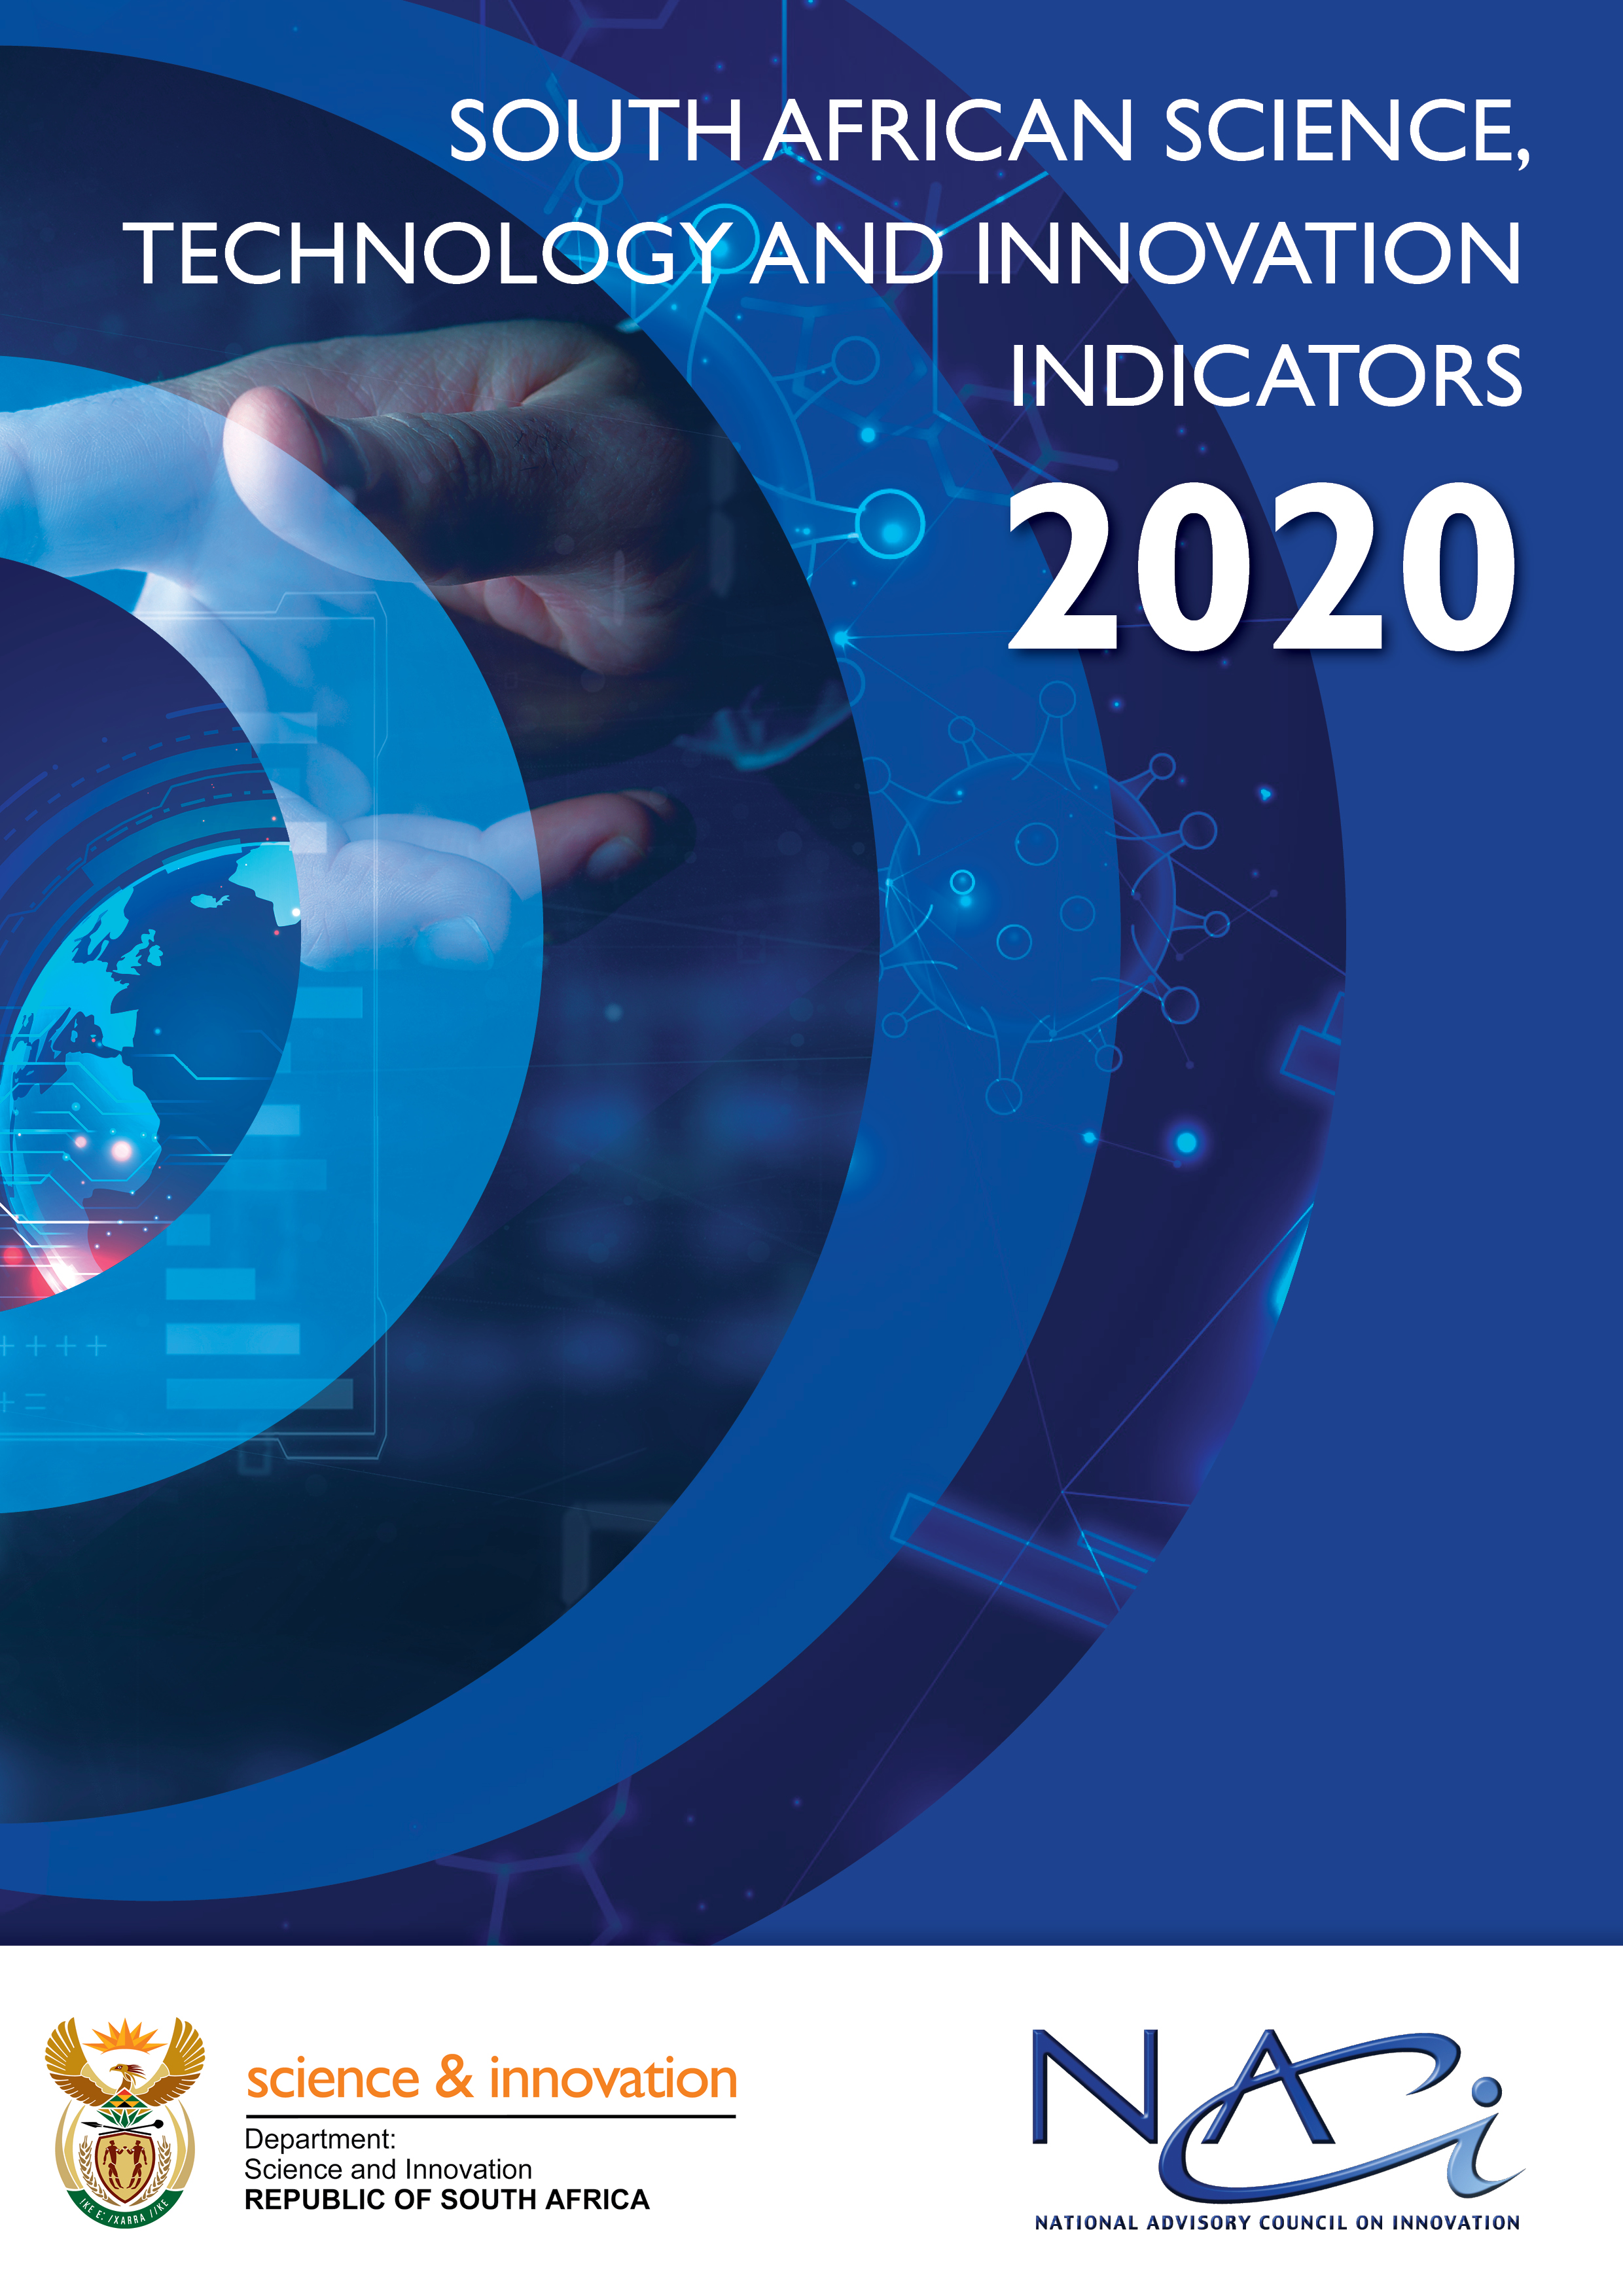 South African Science Technology and Innovation Indicators Report 2020